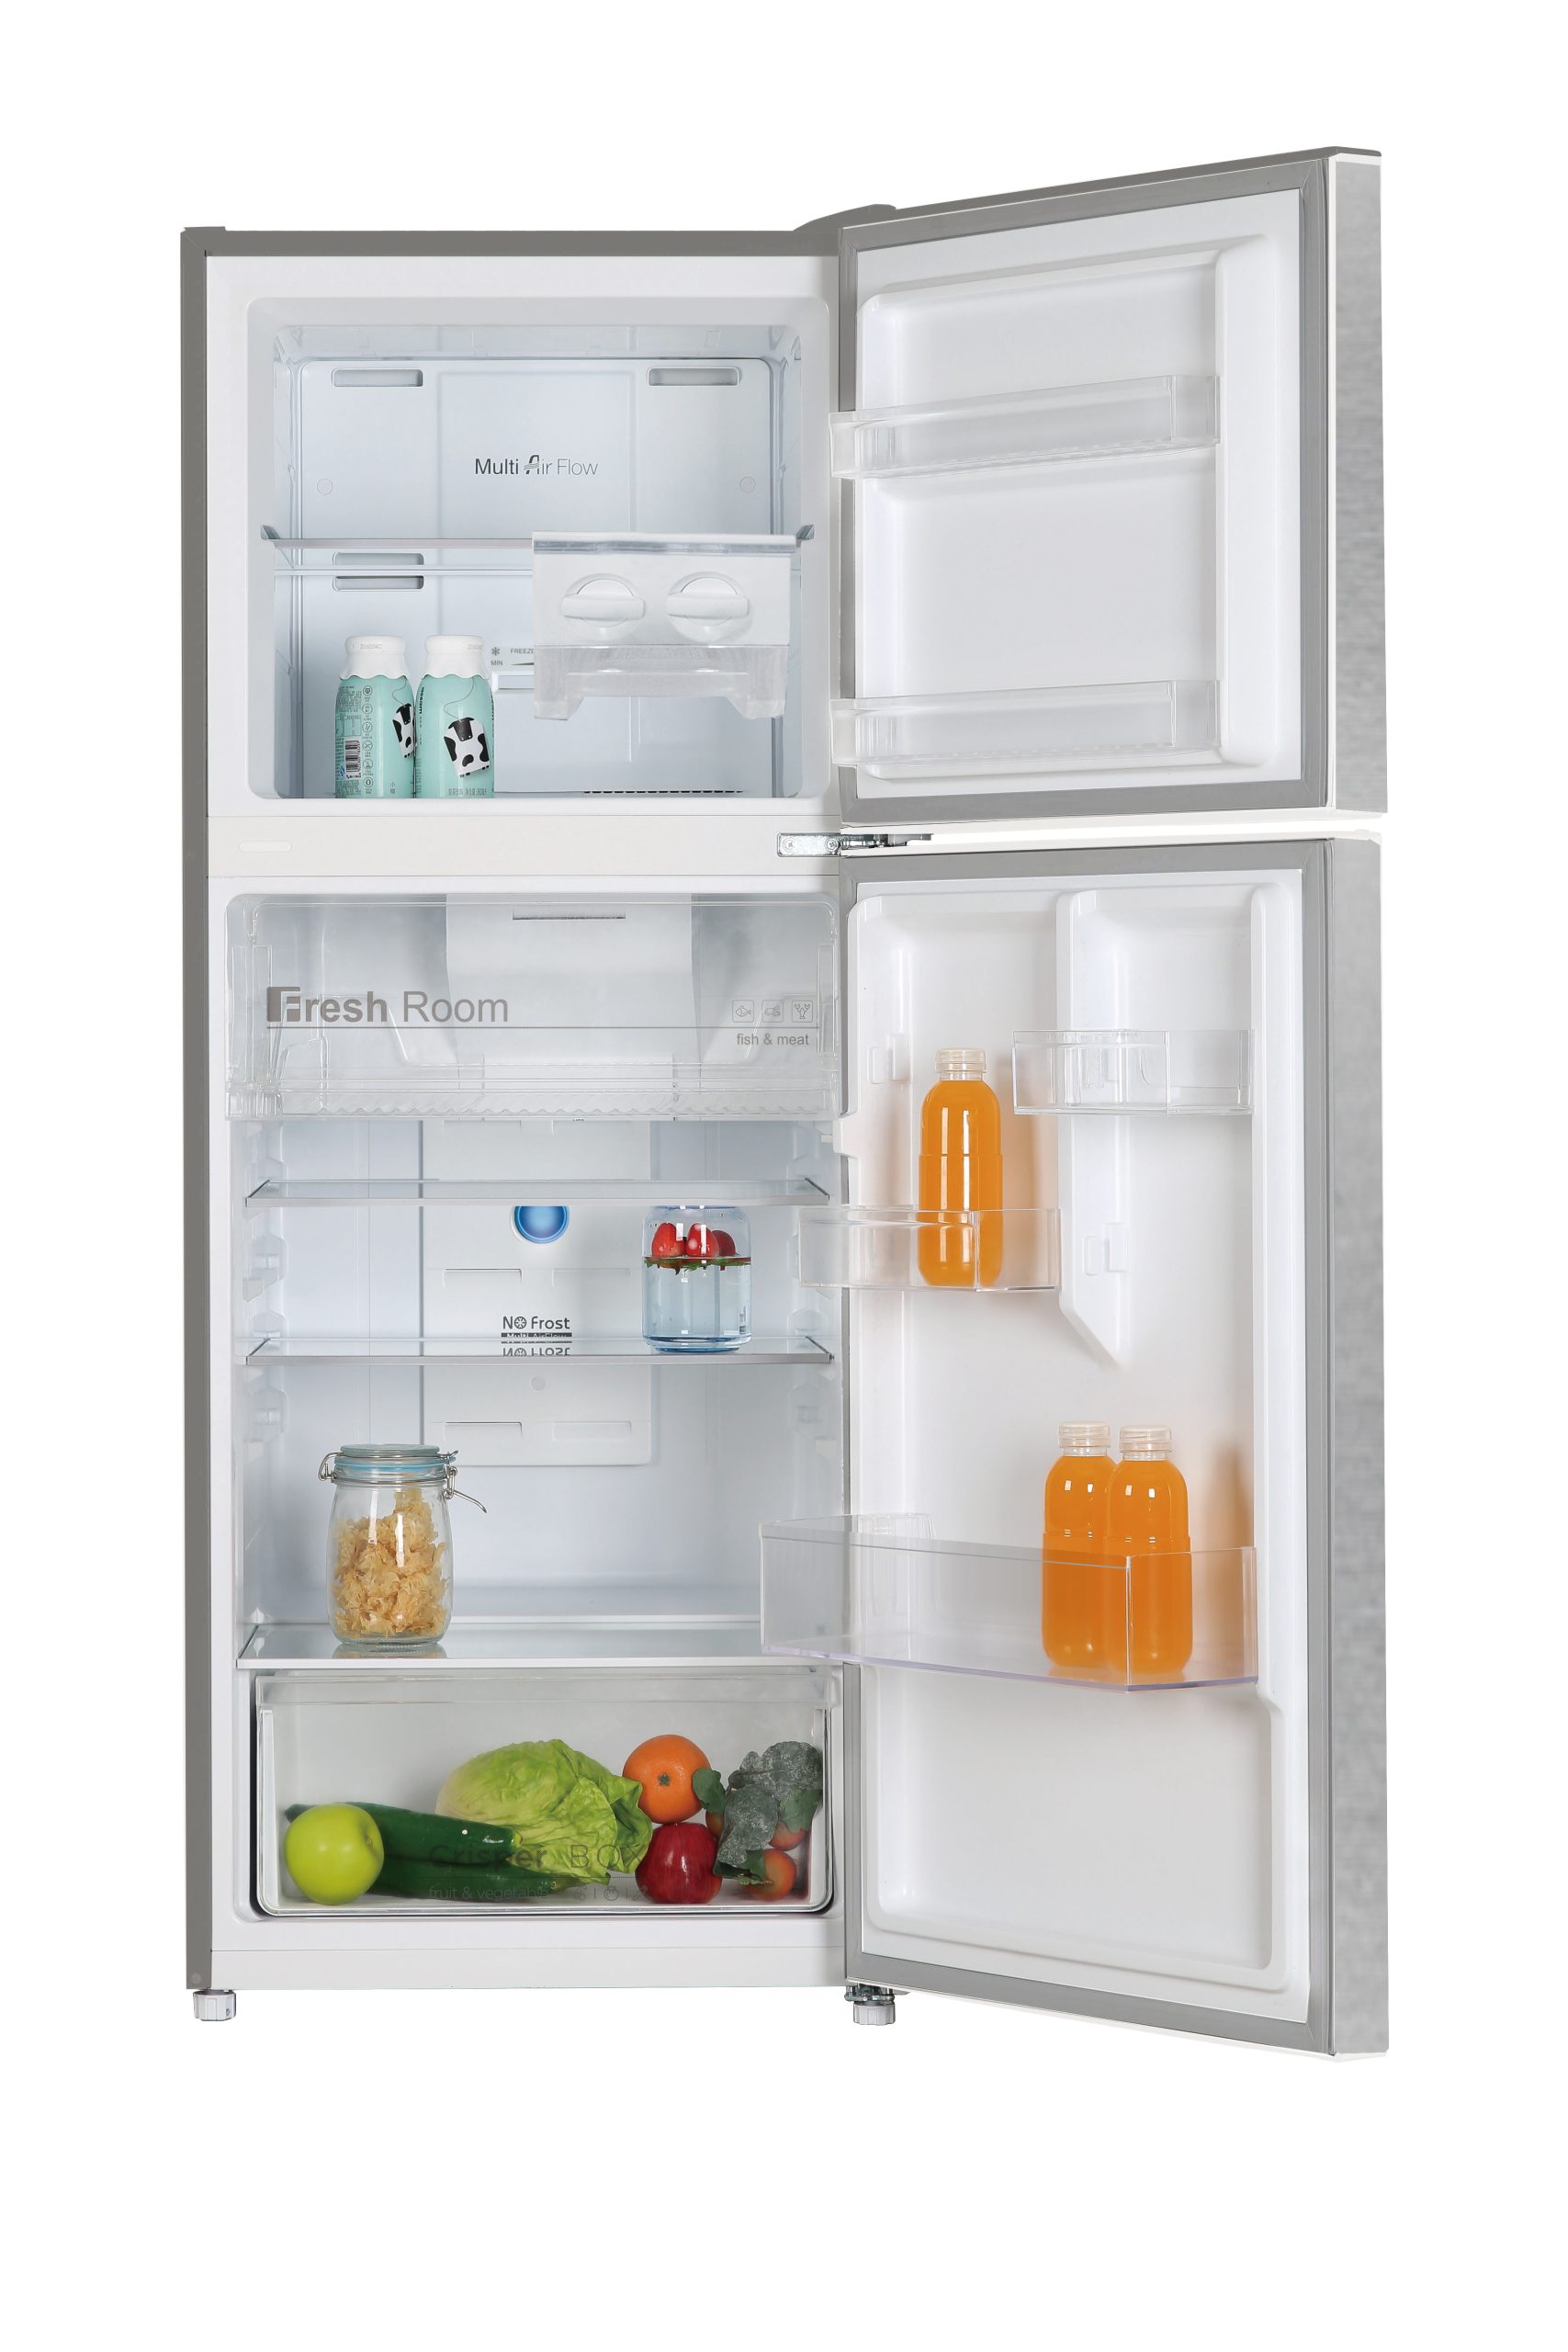 Mika Refrigerator, 297L, No Frost, Brush SS Look - MRNF297DS